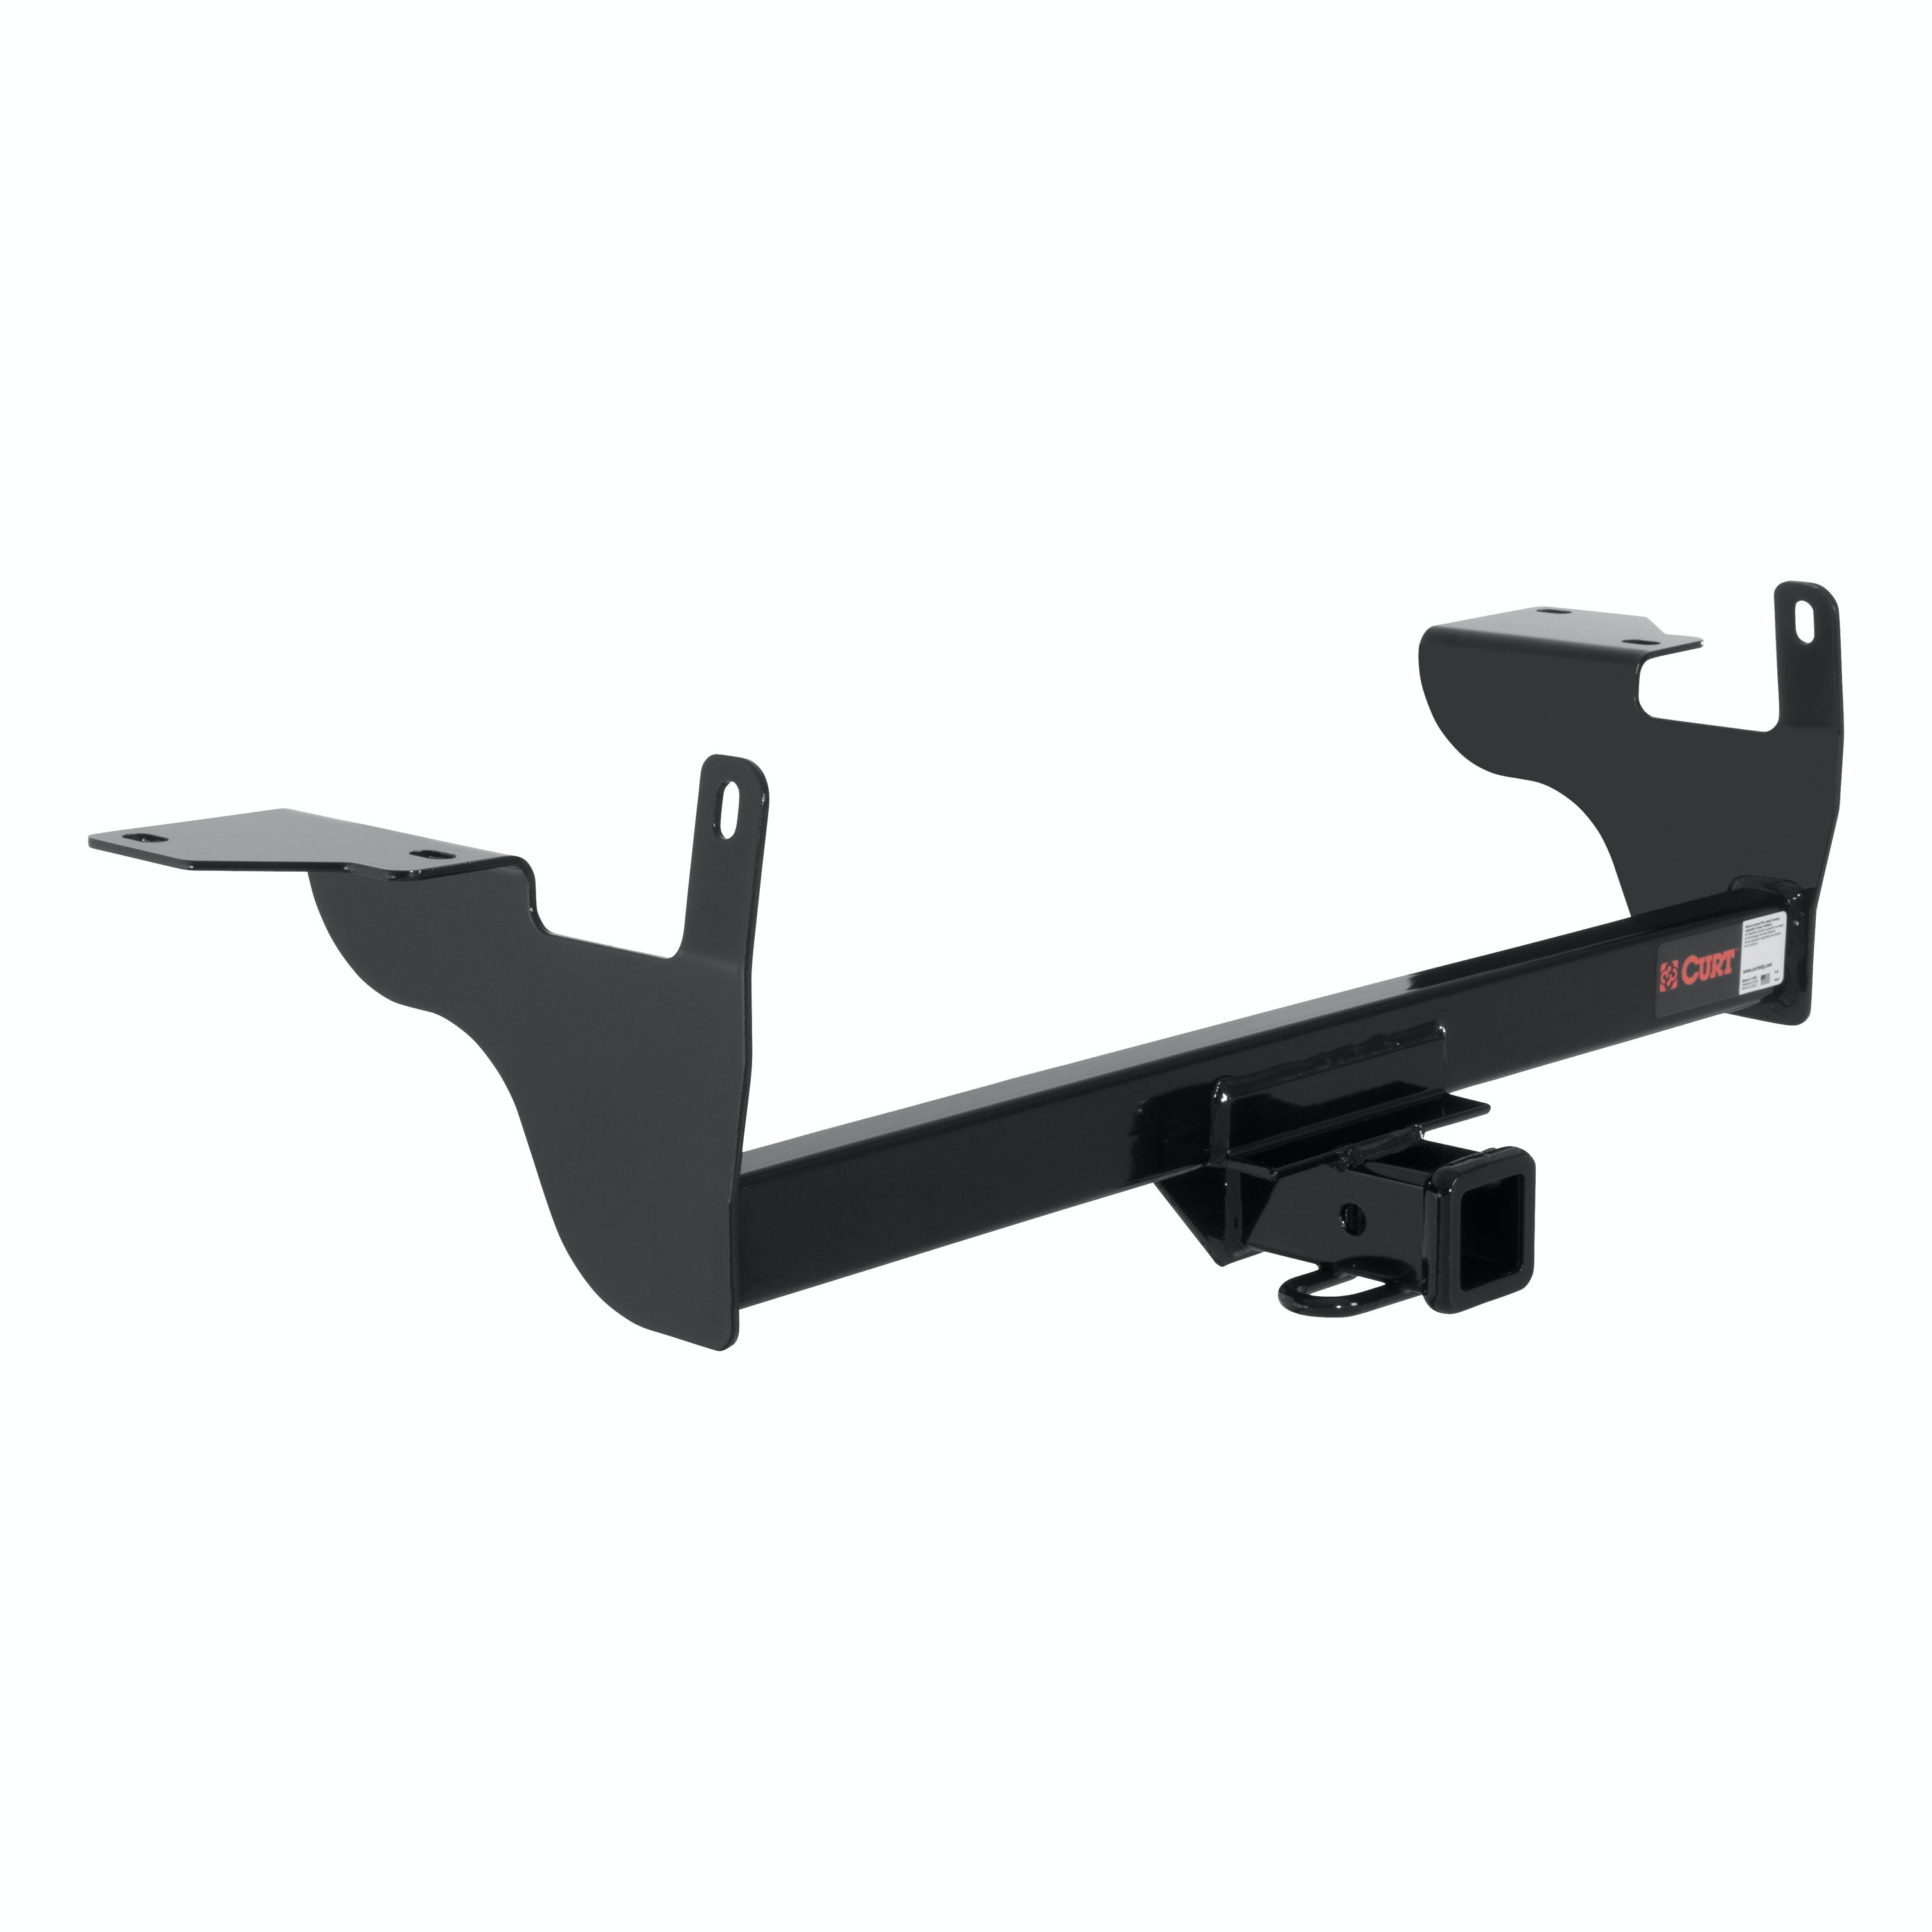 CURT 13268 Class 3 Trailer Hitch, 2 Receiver, Select Volvo XC60